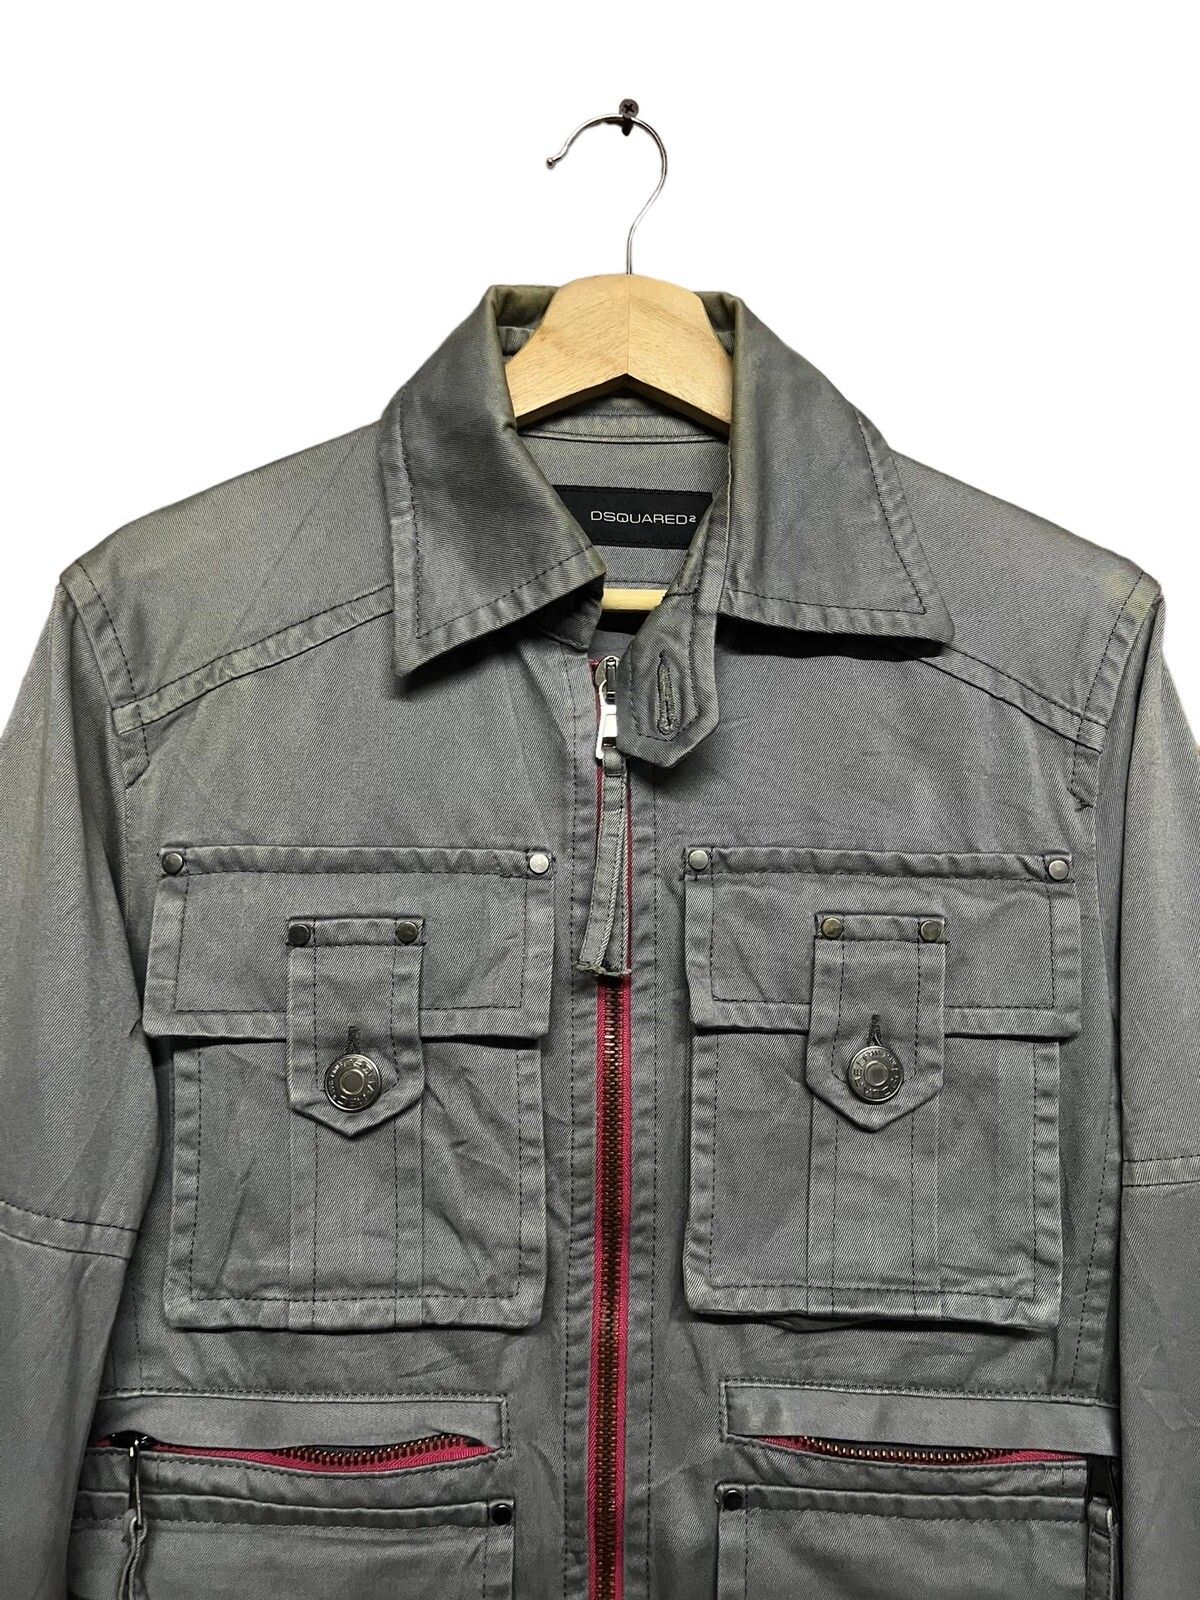 Dsquared2 Italy Bikers Multipocket Jacket - 7